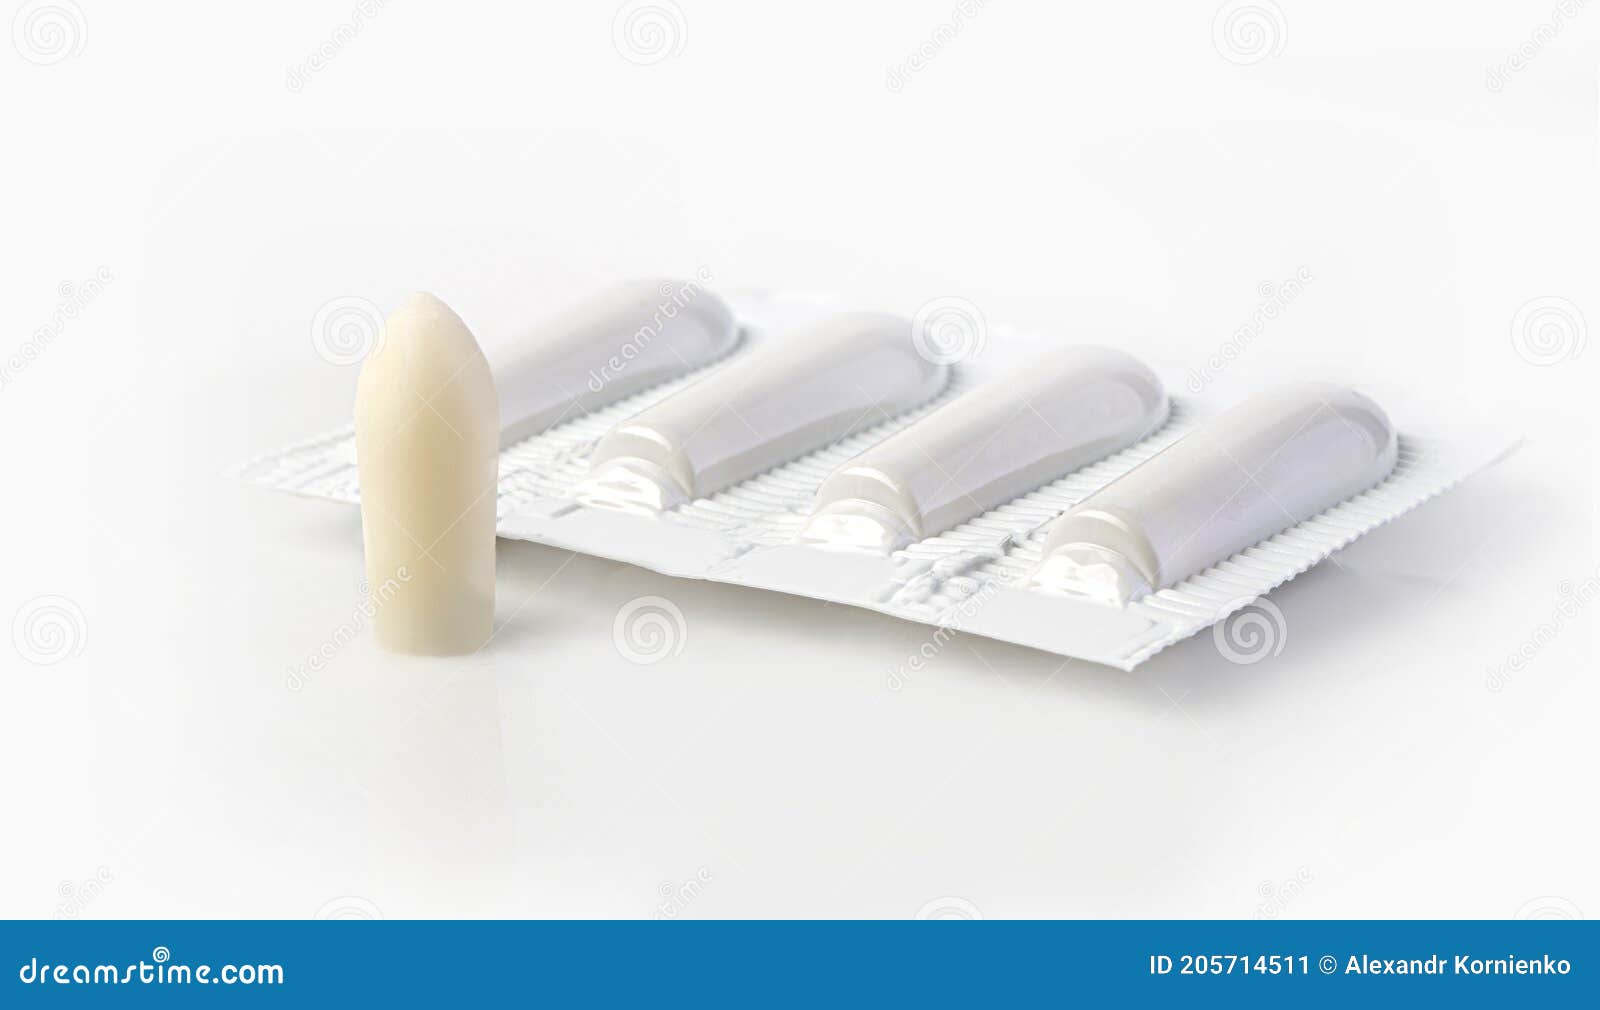 Suppository For Anal Or Vaginal Use Stock Image Image Of Medication Drug 205714511